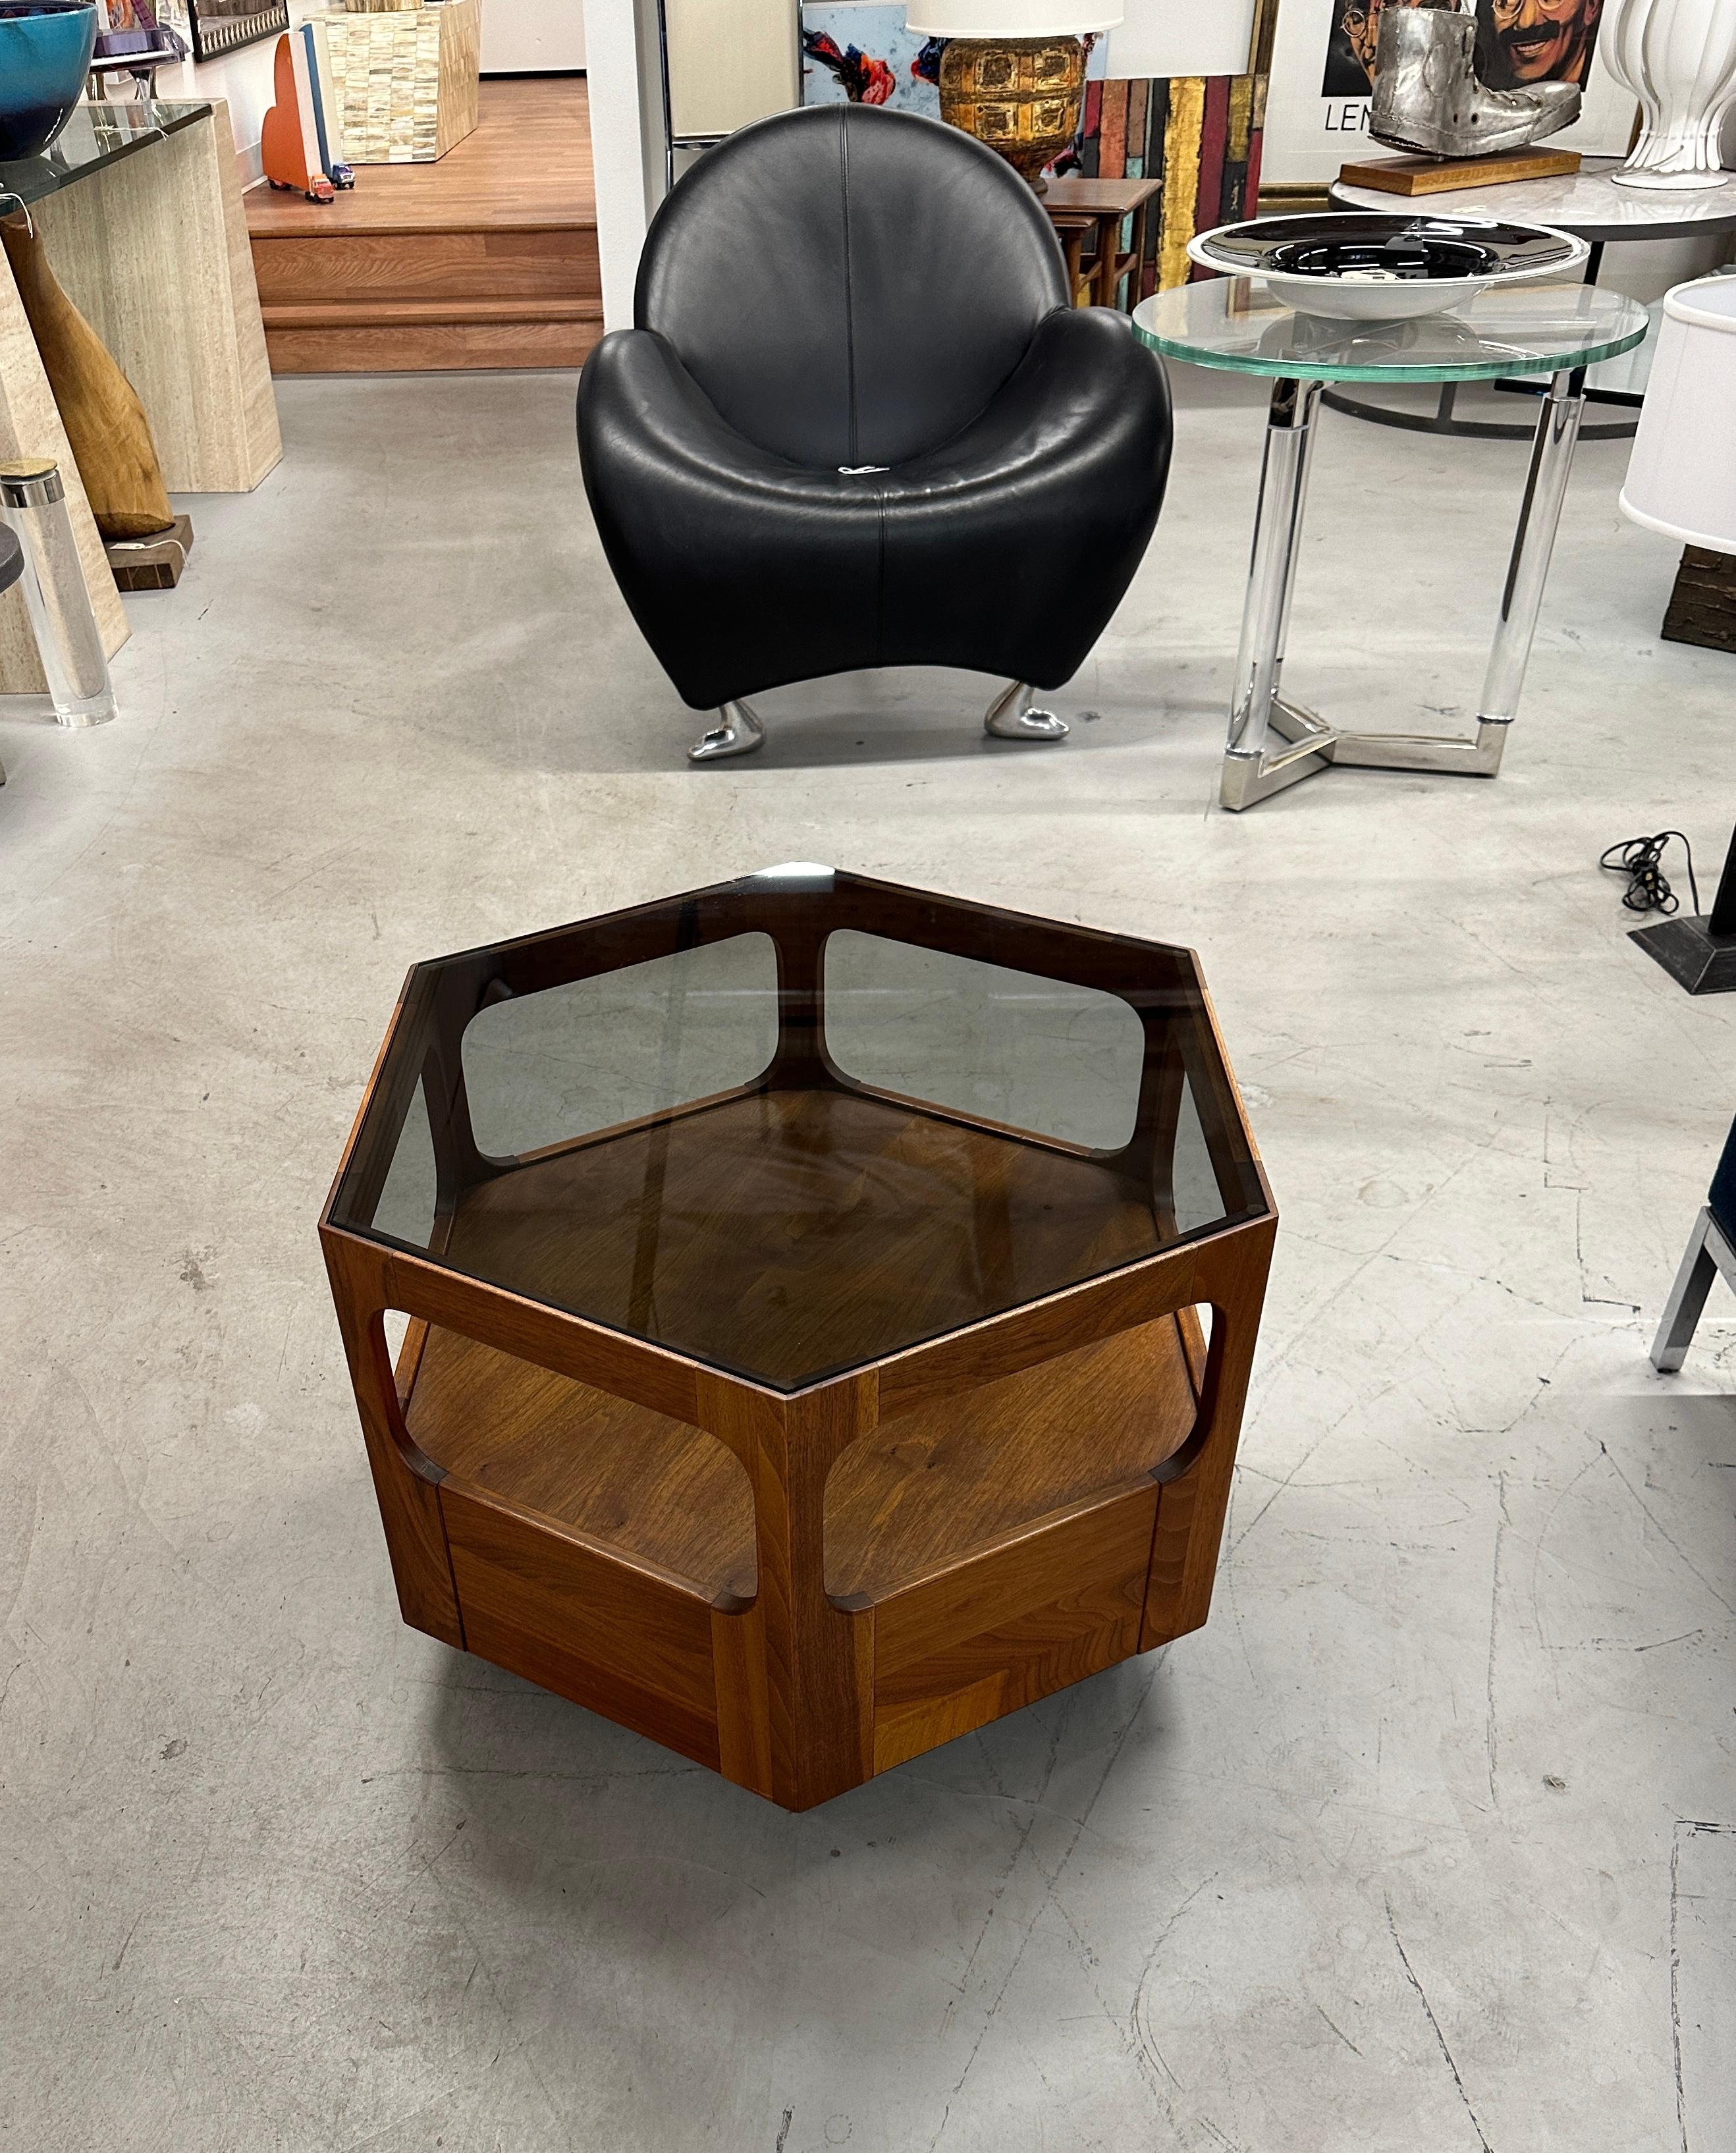 A beautiful walnut and smoked glass 6 sided hexagonal side table designed by John Keal for Brown Saltman. It is pictured in our gallery with the matching coffee table and other side table from the same lovely Palm Spring estate. There is a Florence